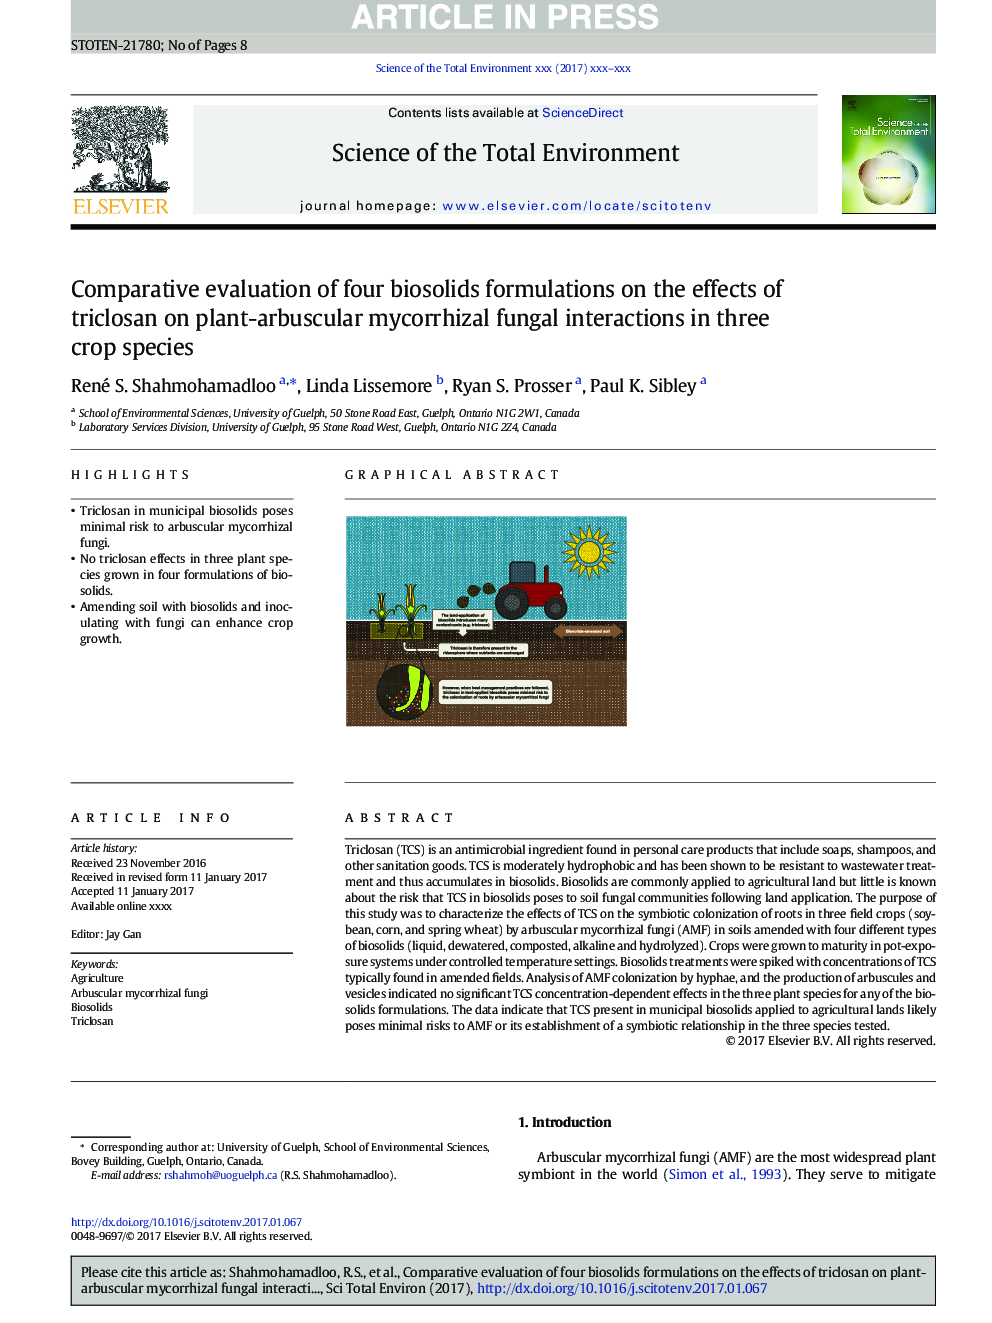 Comparative evaluation of four biosolids formulations on the effects of triclosan on plant-arbuscular mycorrhizal fungal interactions in three crop species